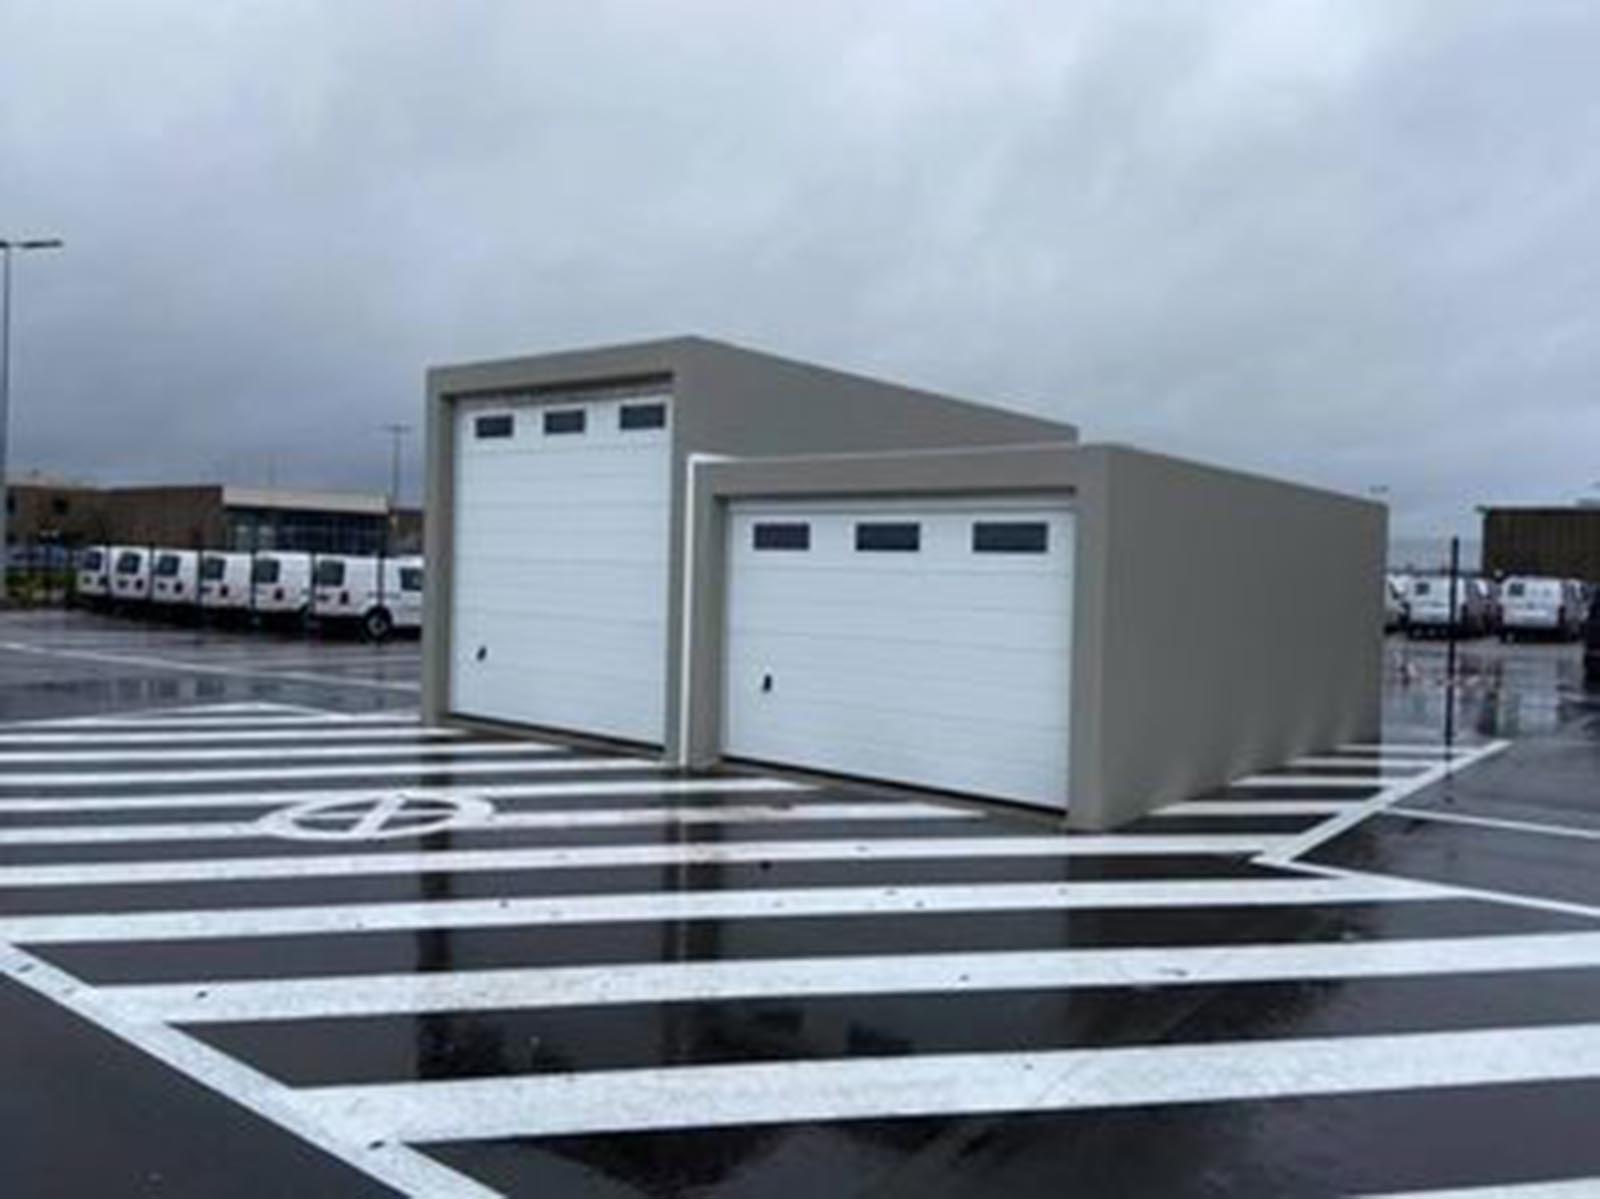 D’Ieteren Immo: quarantine boxes for faulty EVs and hybrids